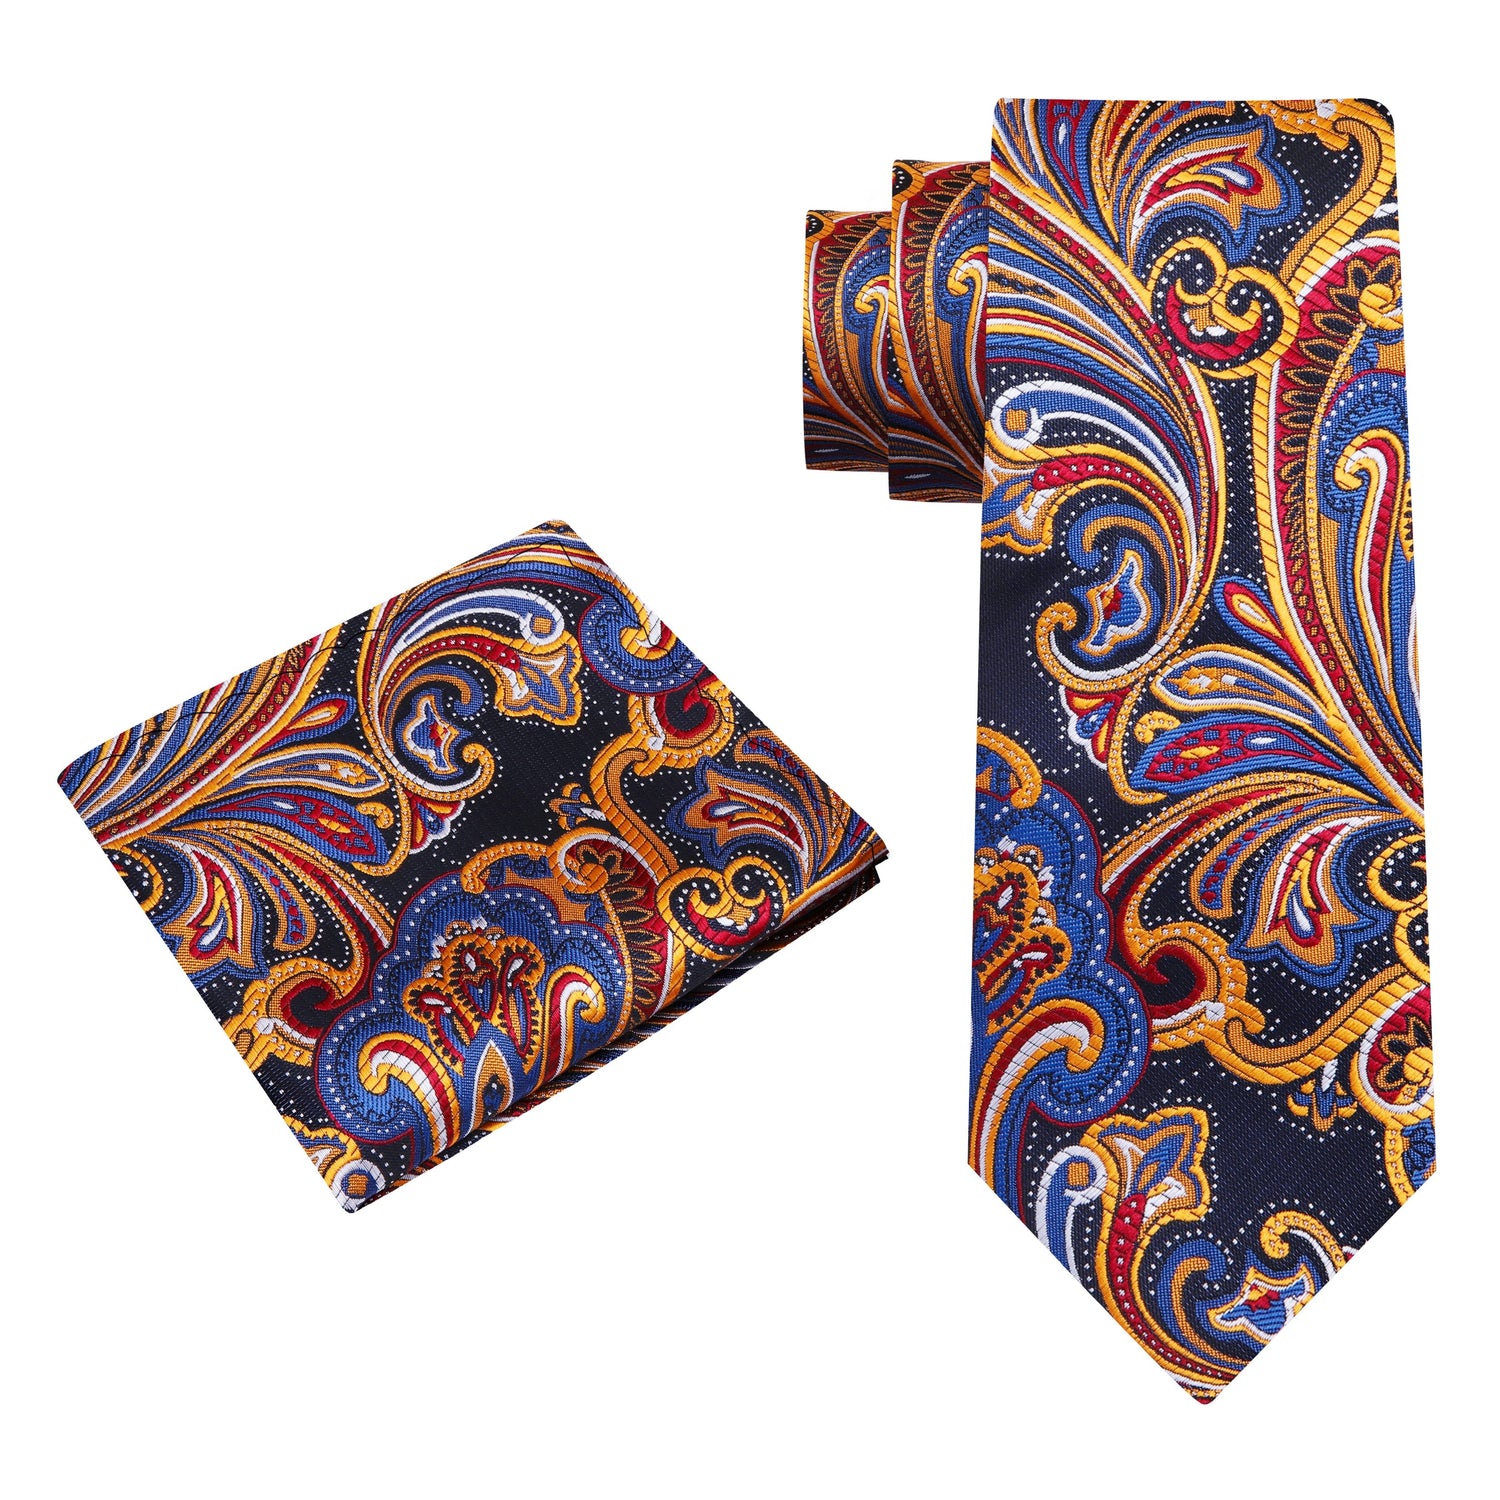 View 2: Blue, Red, Orange Paisley Tie and Square